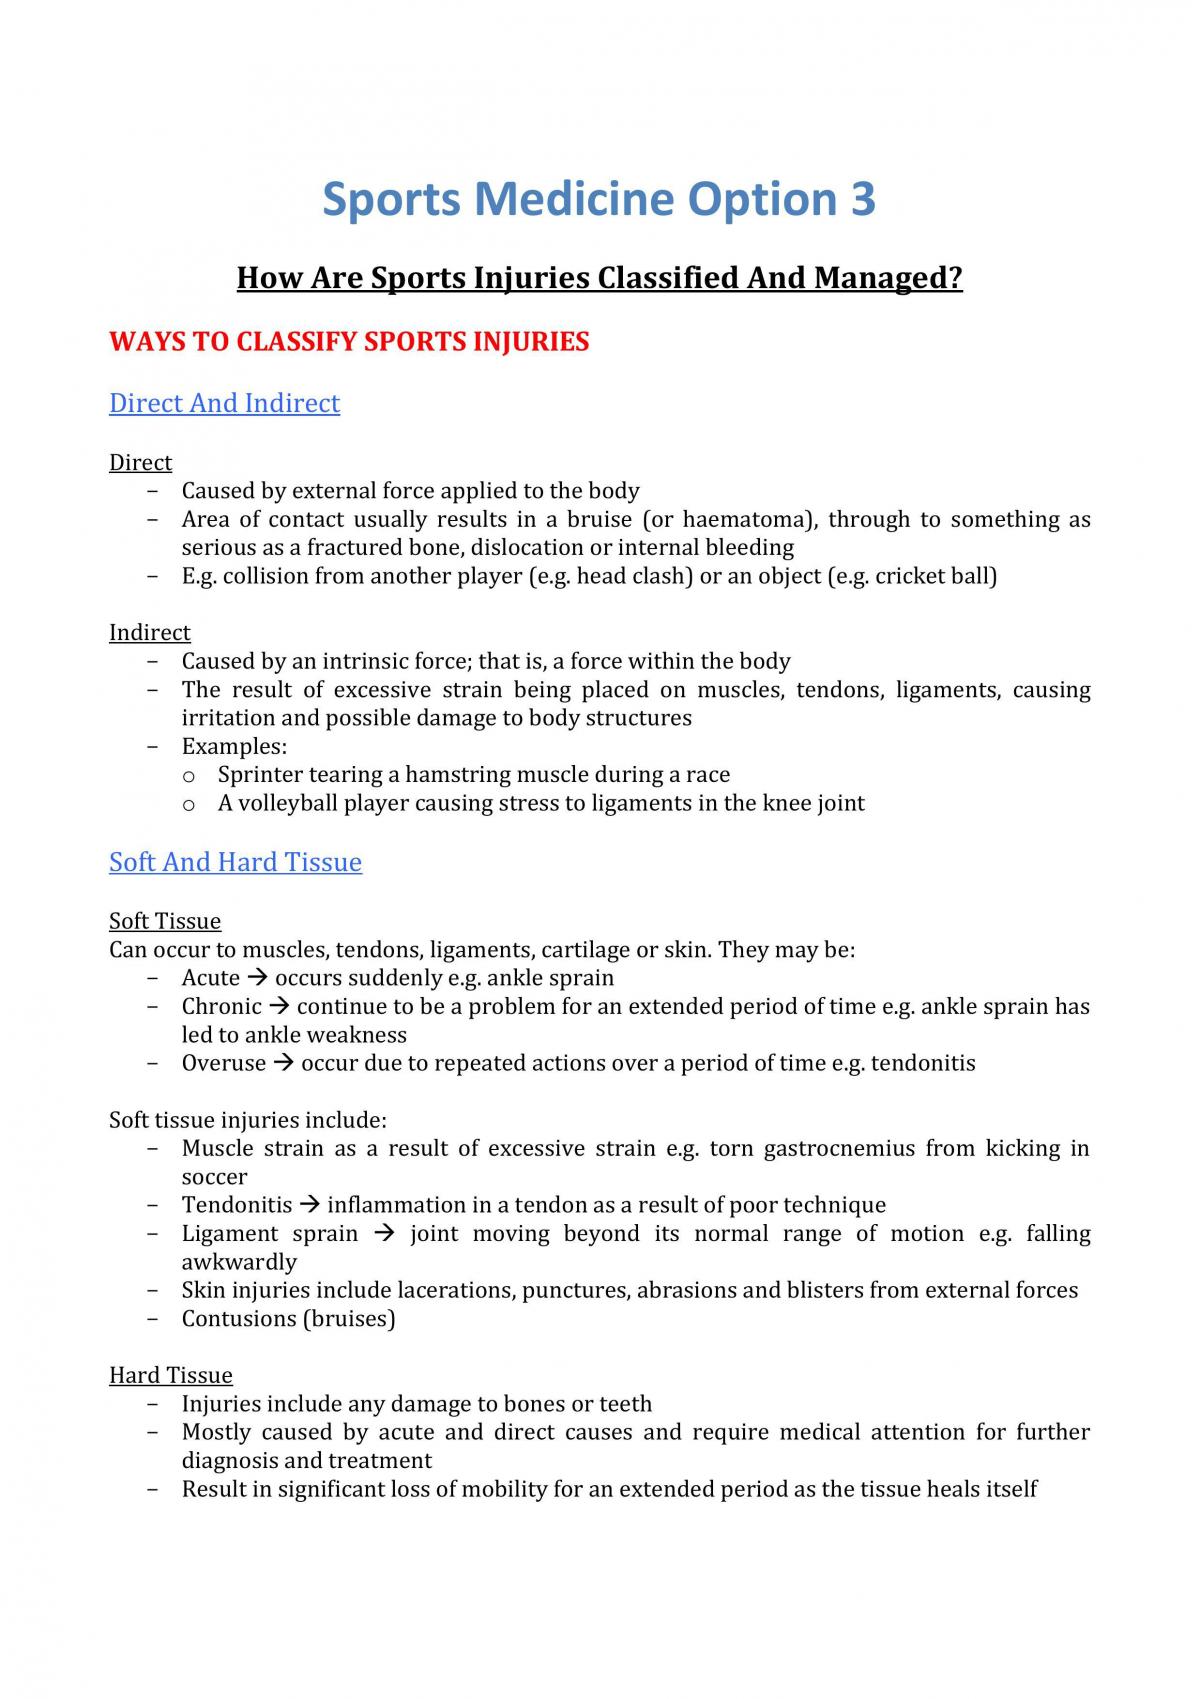 research questions for sports medicine